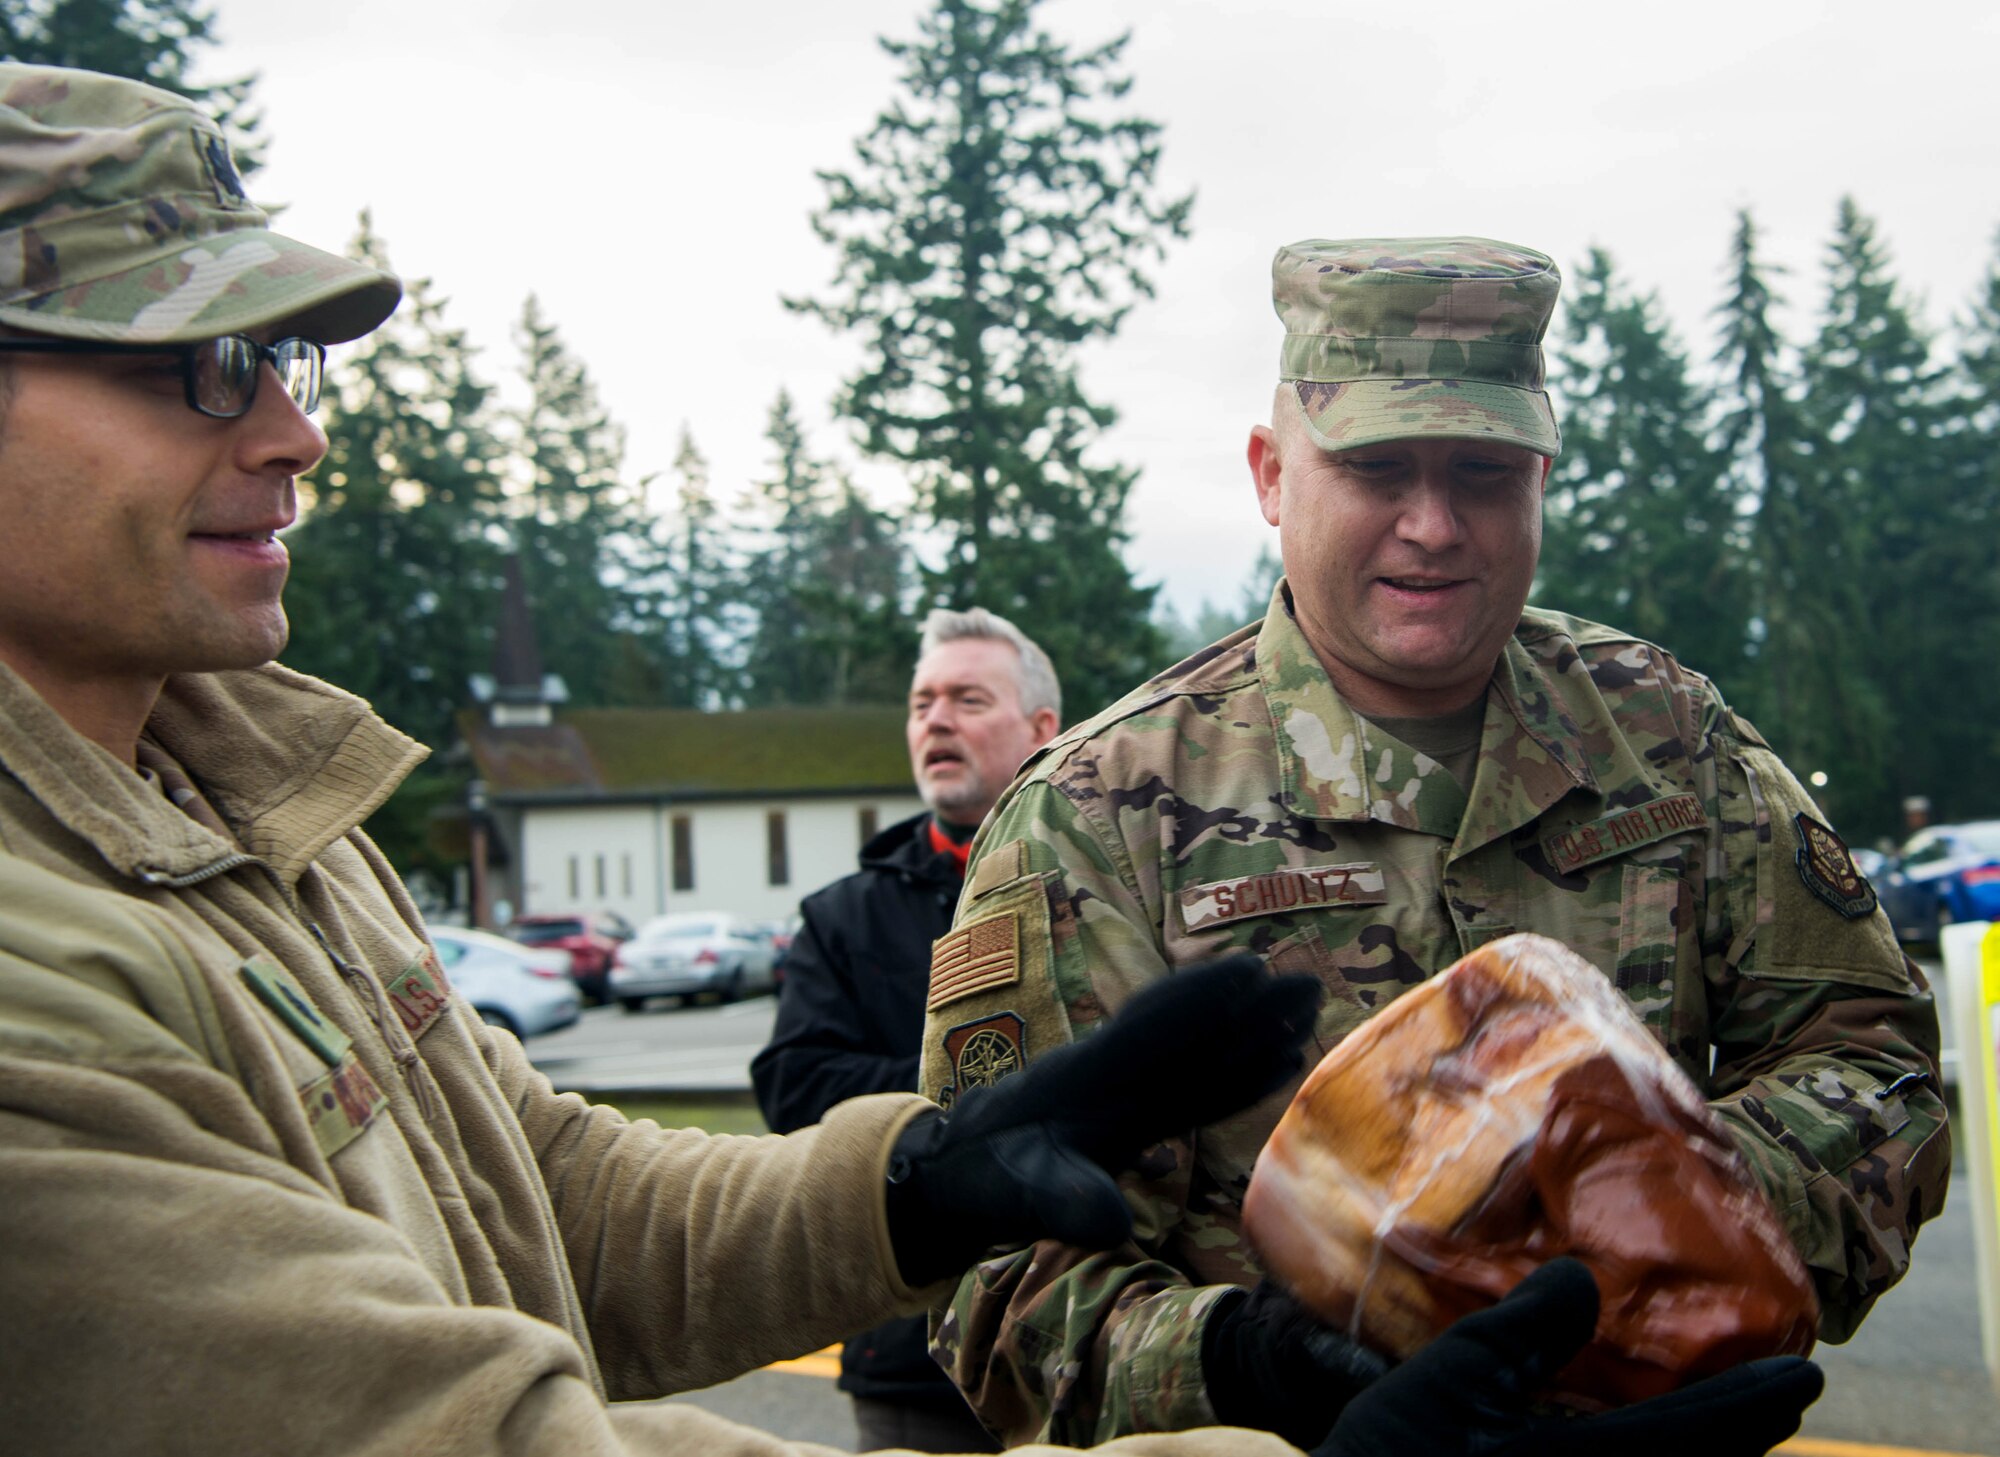 Chief Master Sgt. Rob Schultz, 62nd Airlift Wing command chief, passes along a ham during Operation Ham Grenade at Joint Base Lewis-McChord, Wash., Dec. 17, 2019. More than 300 ham were donated to Team McChord Airmen for them and their families during the holidays. (U.S. Air Force photo by Senior Airman Tryphena Mayhugh)